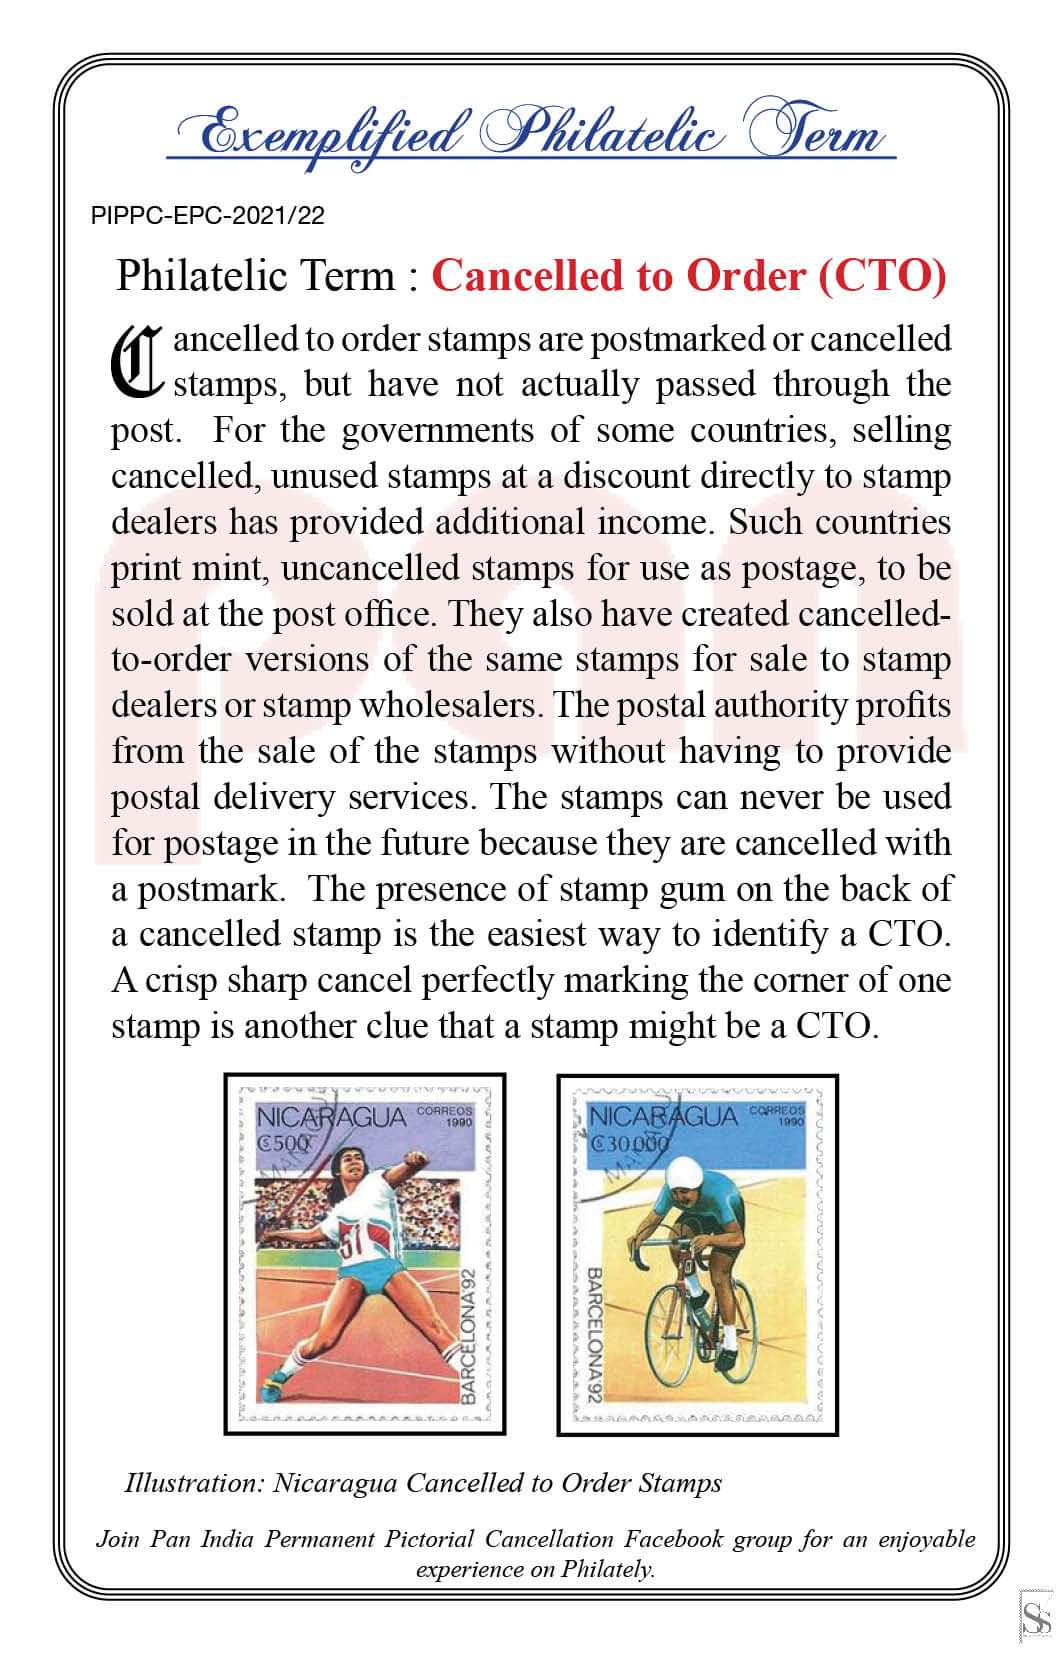 22. Today's exemplified philatelic term-Cancelled to Order (CTO)